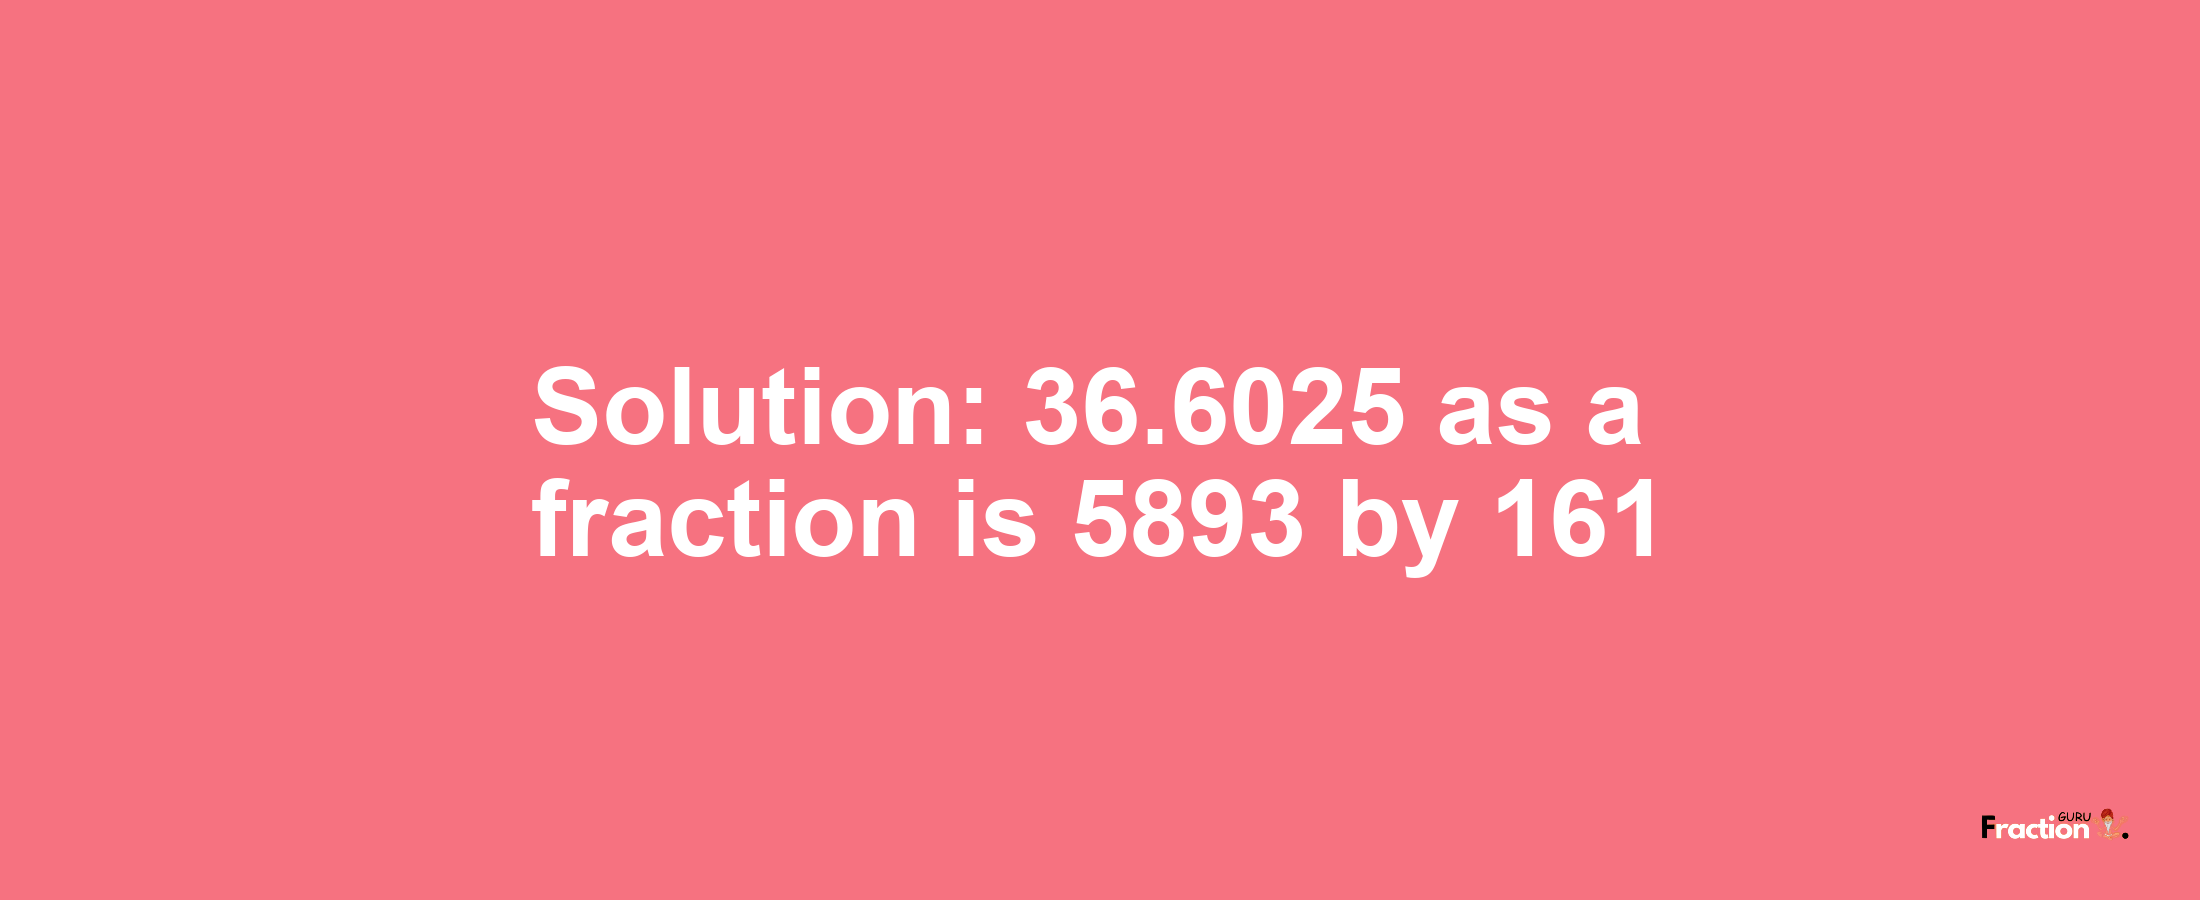 Solution:36.6025 as a fraction is 5893/161